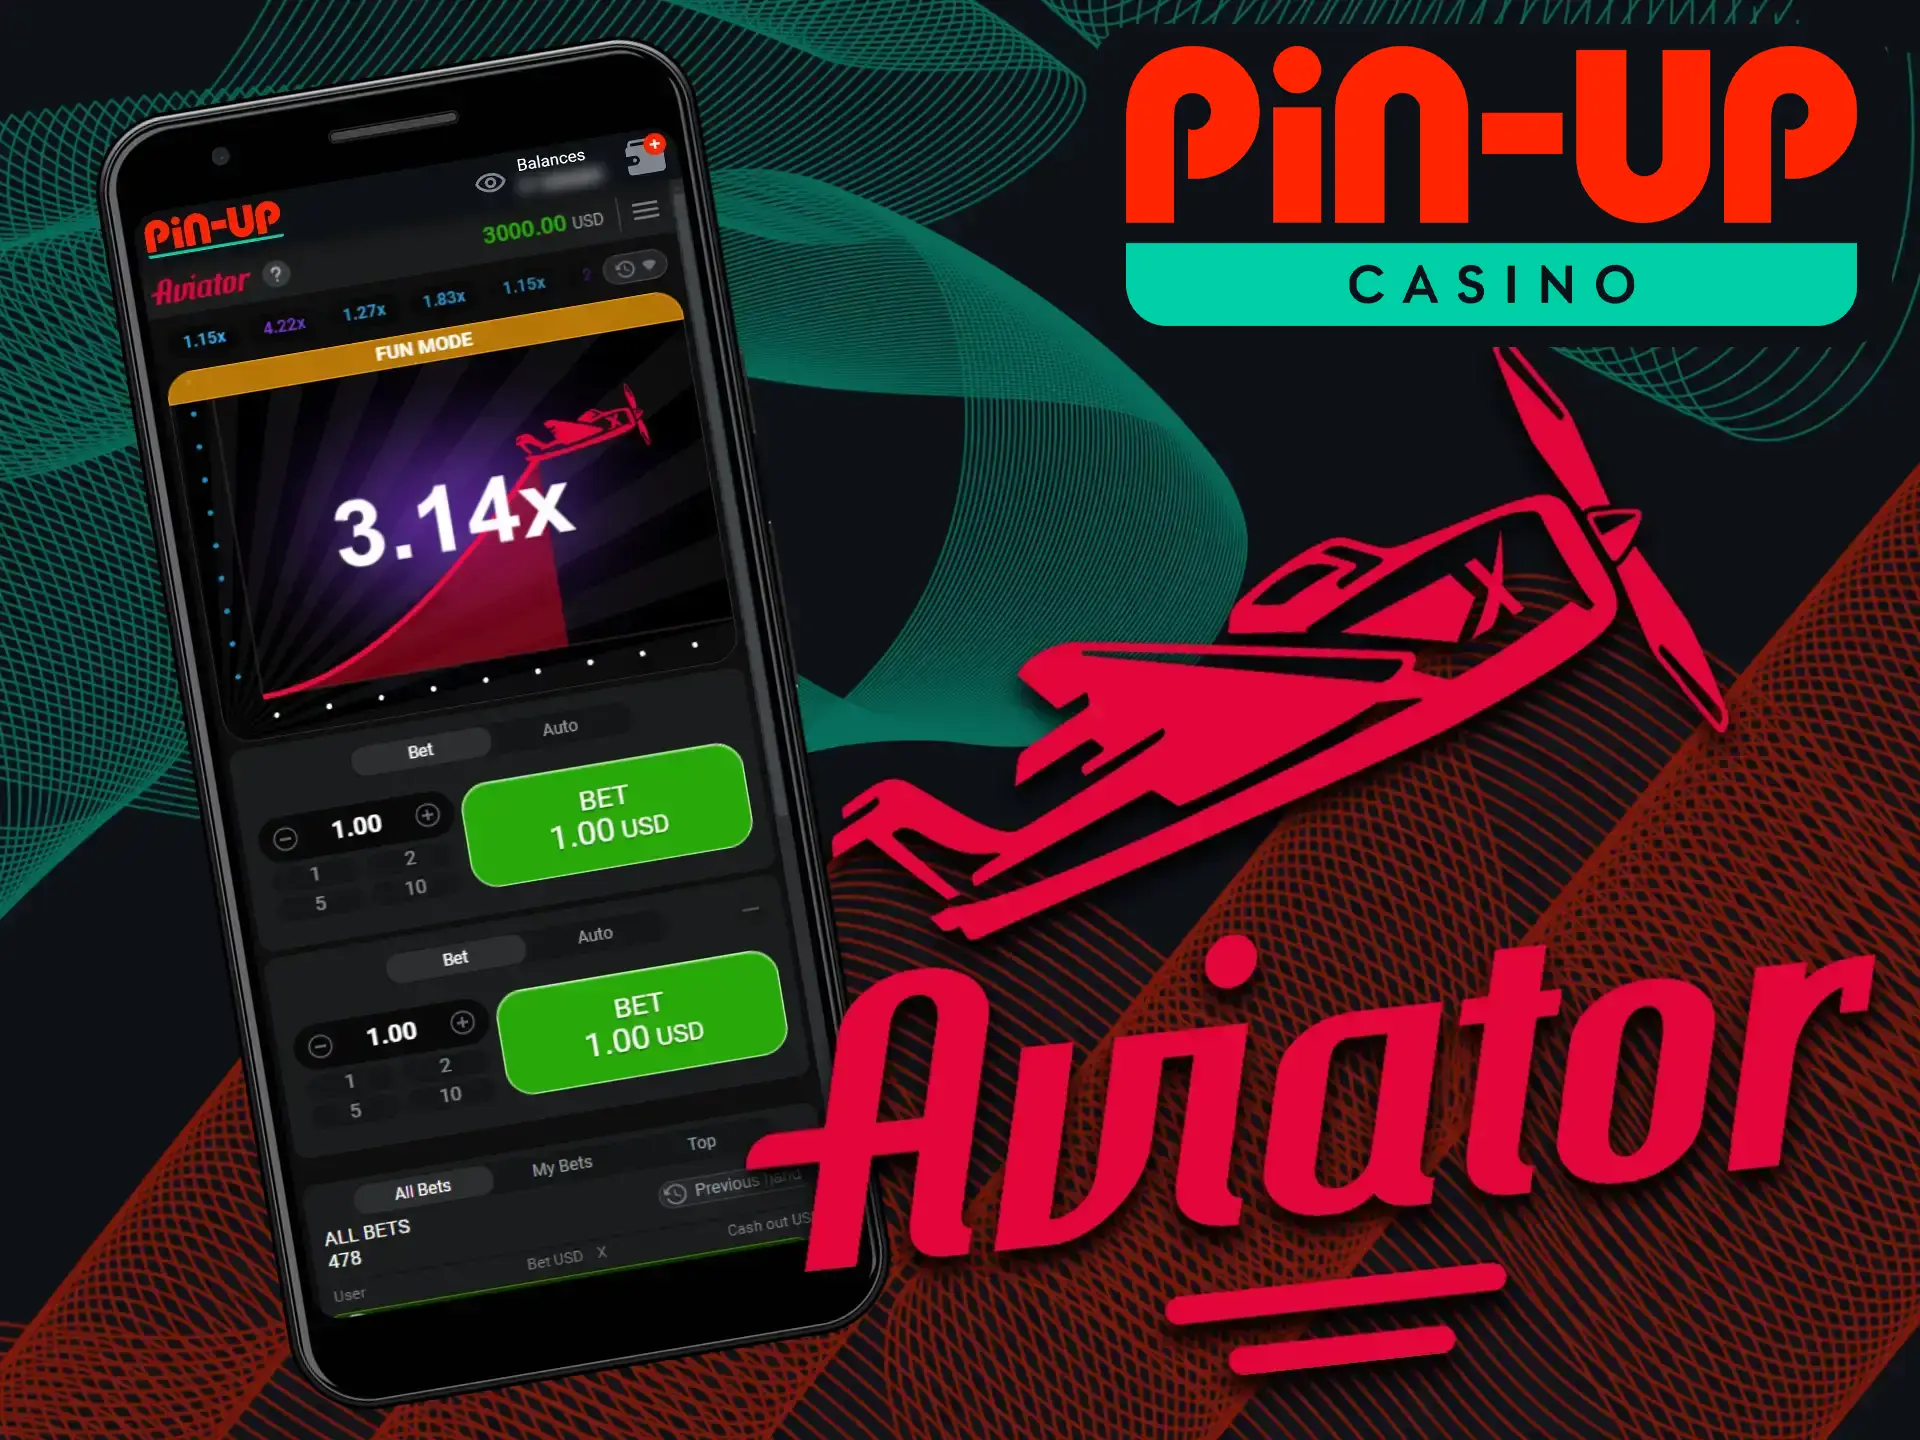 Get the Aviator experience with the Pin-Up Casino app.